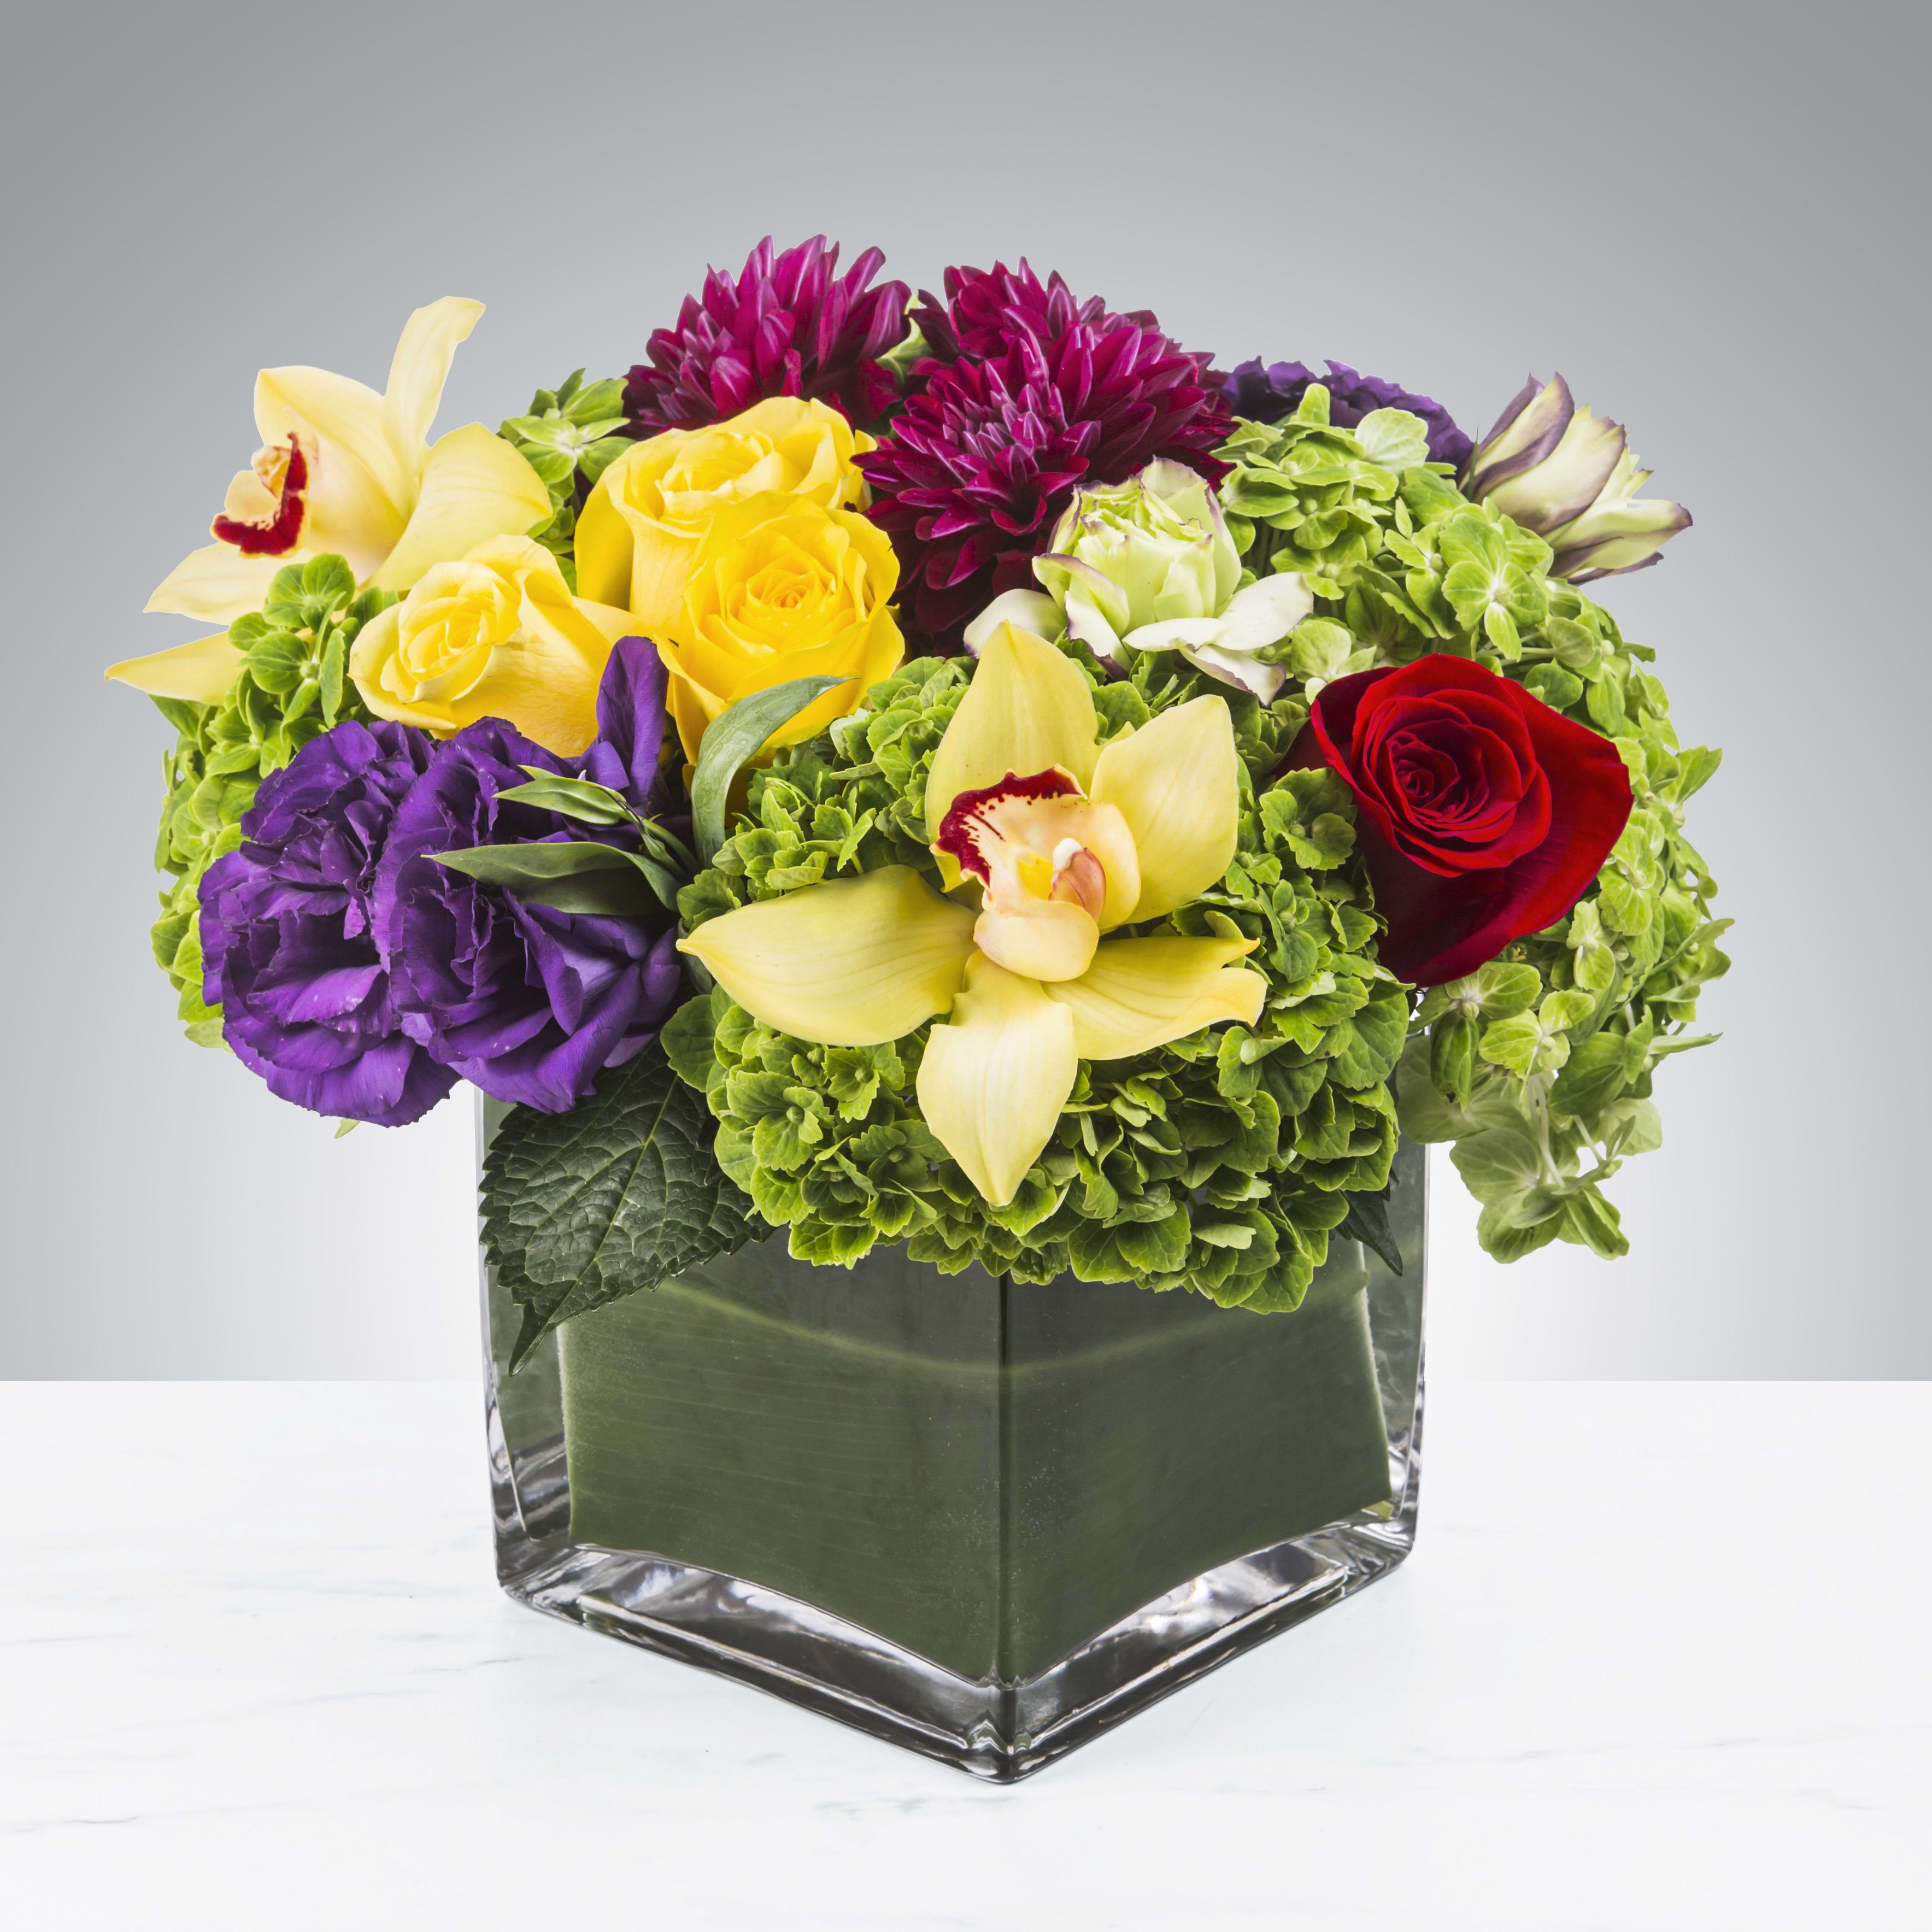 Along for the Ride by BloomNation™ - This multicolored arrangement includes roses, dahlias, orchids, lisianthus and hydrangeas in a large cubed vase. Along for the Ride by BloomNation™ is the perfect way to send a little kindness.   APPROXIMATE DIMENSIONS 12&quot; W X 12&quot; H